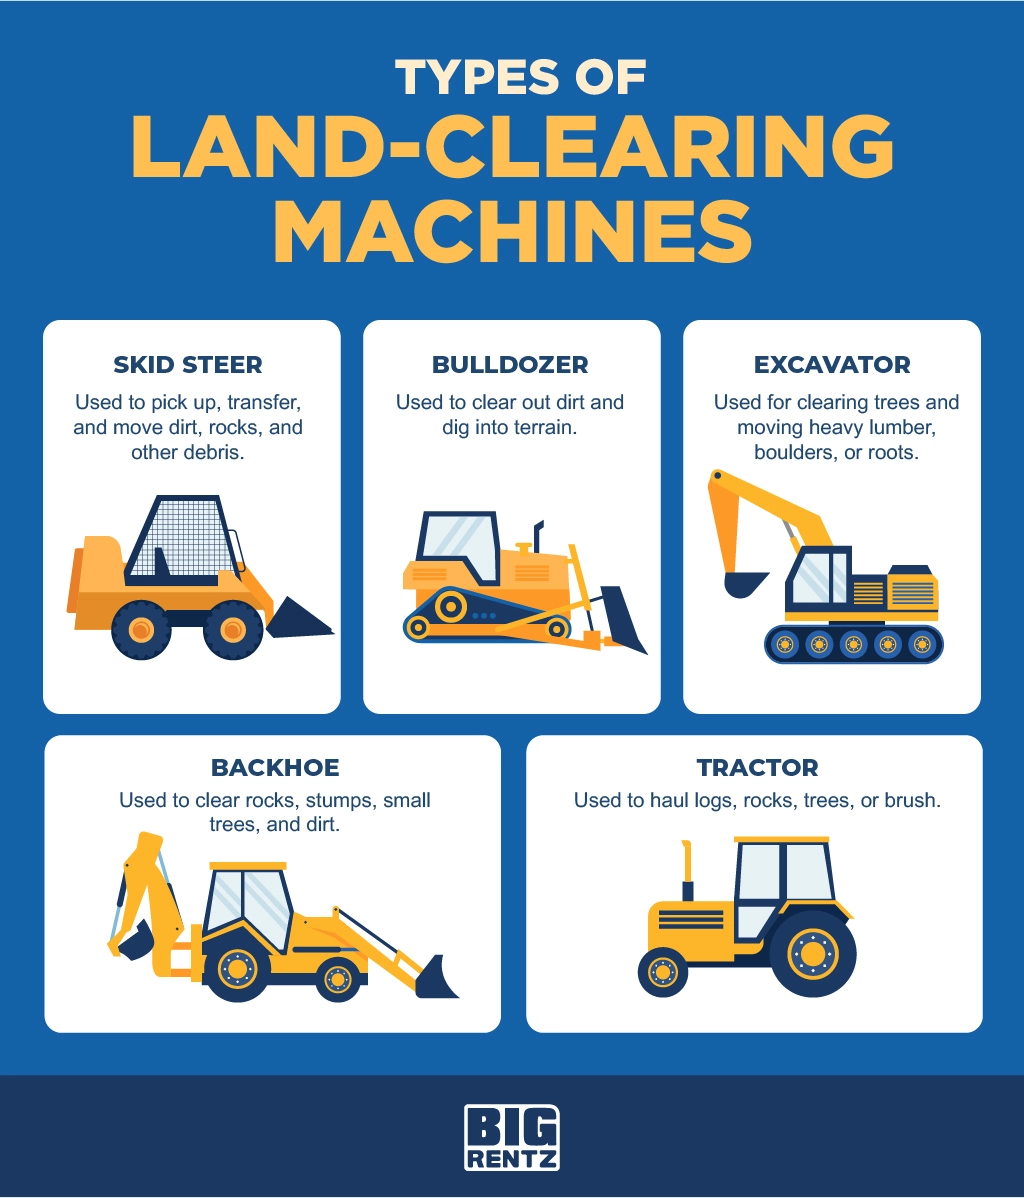 Top-Rated Land Clearing Tools: Quality Equipment Matters